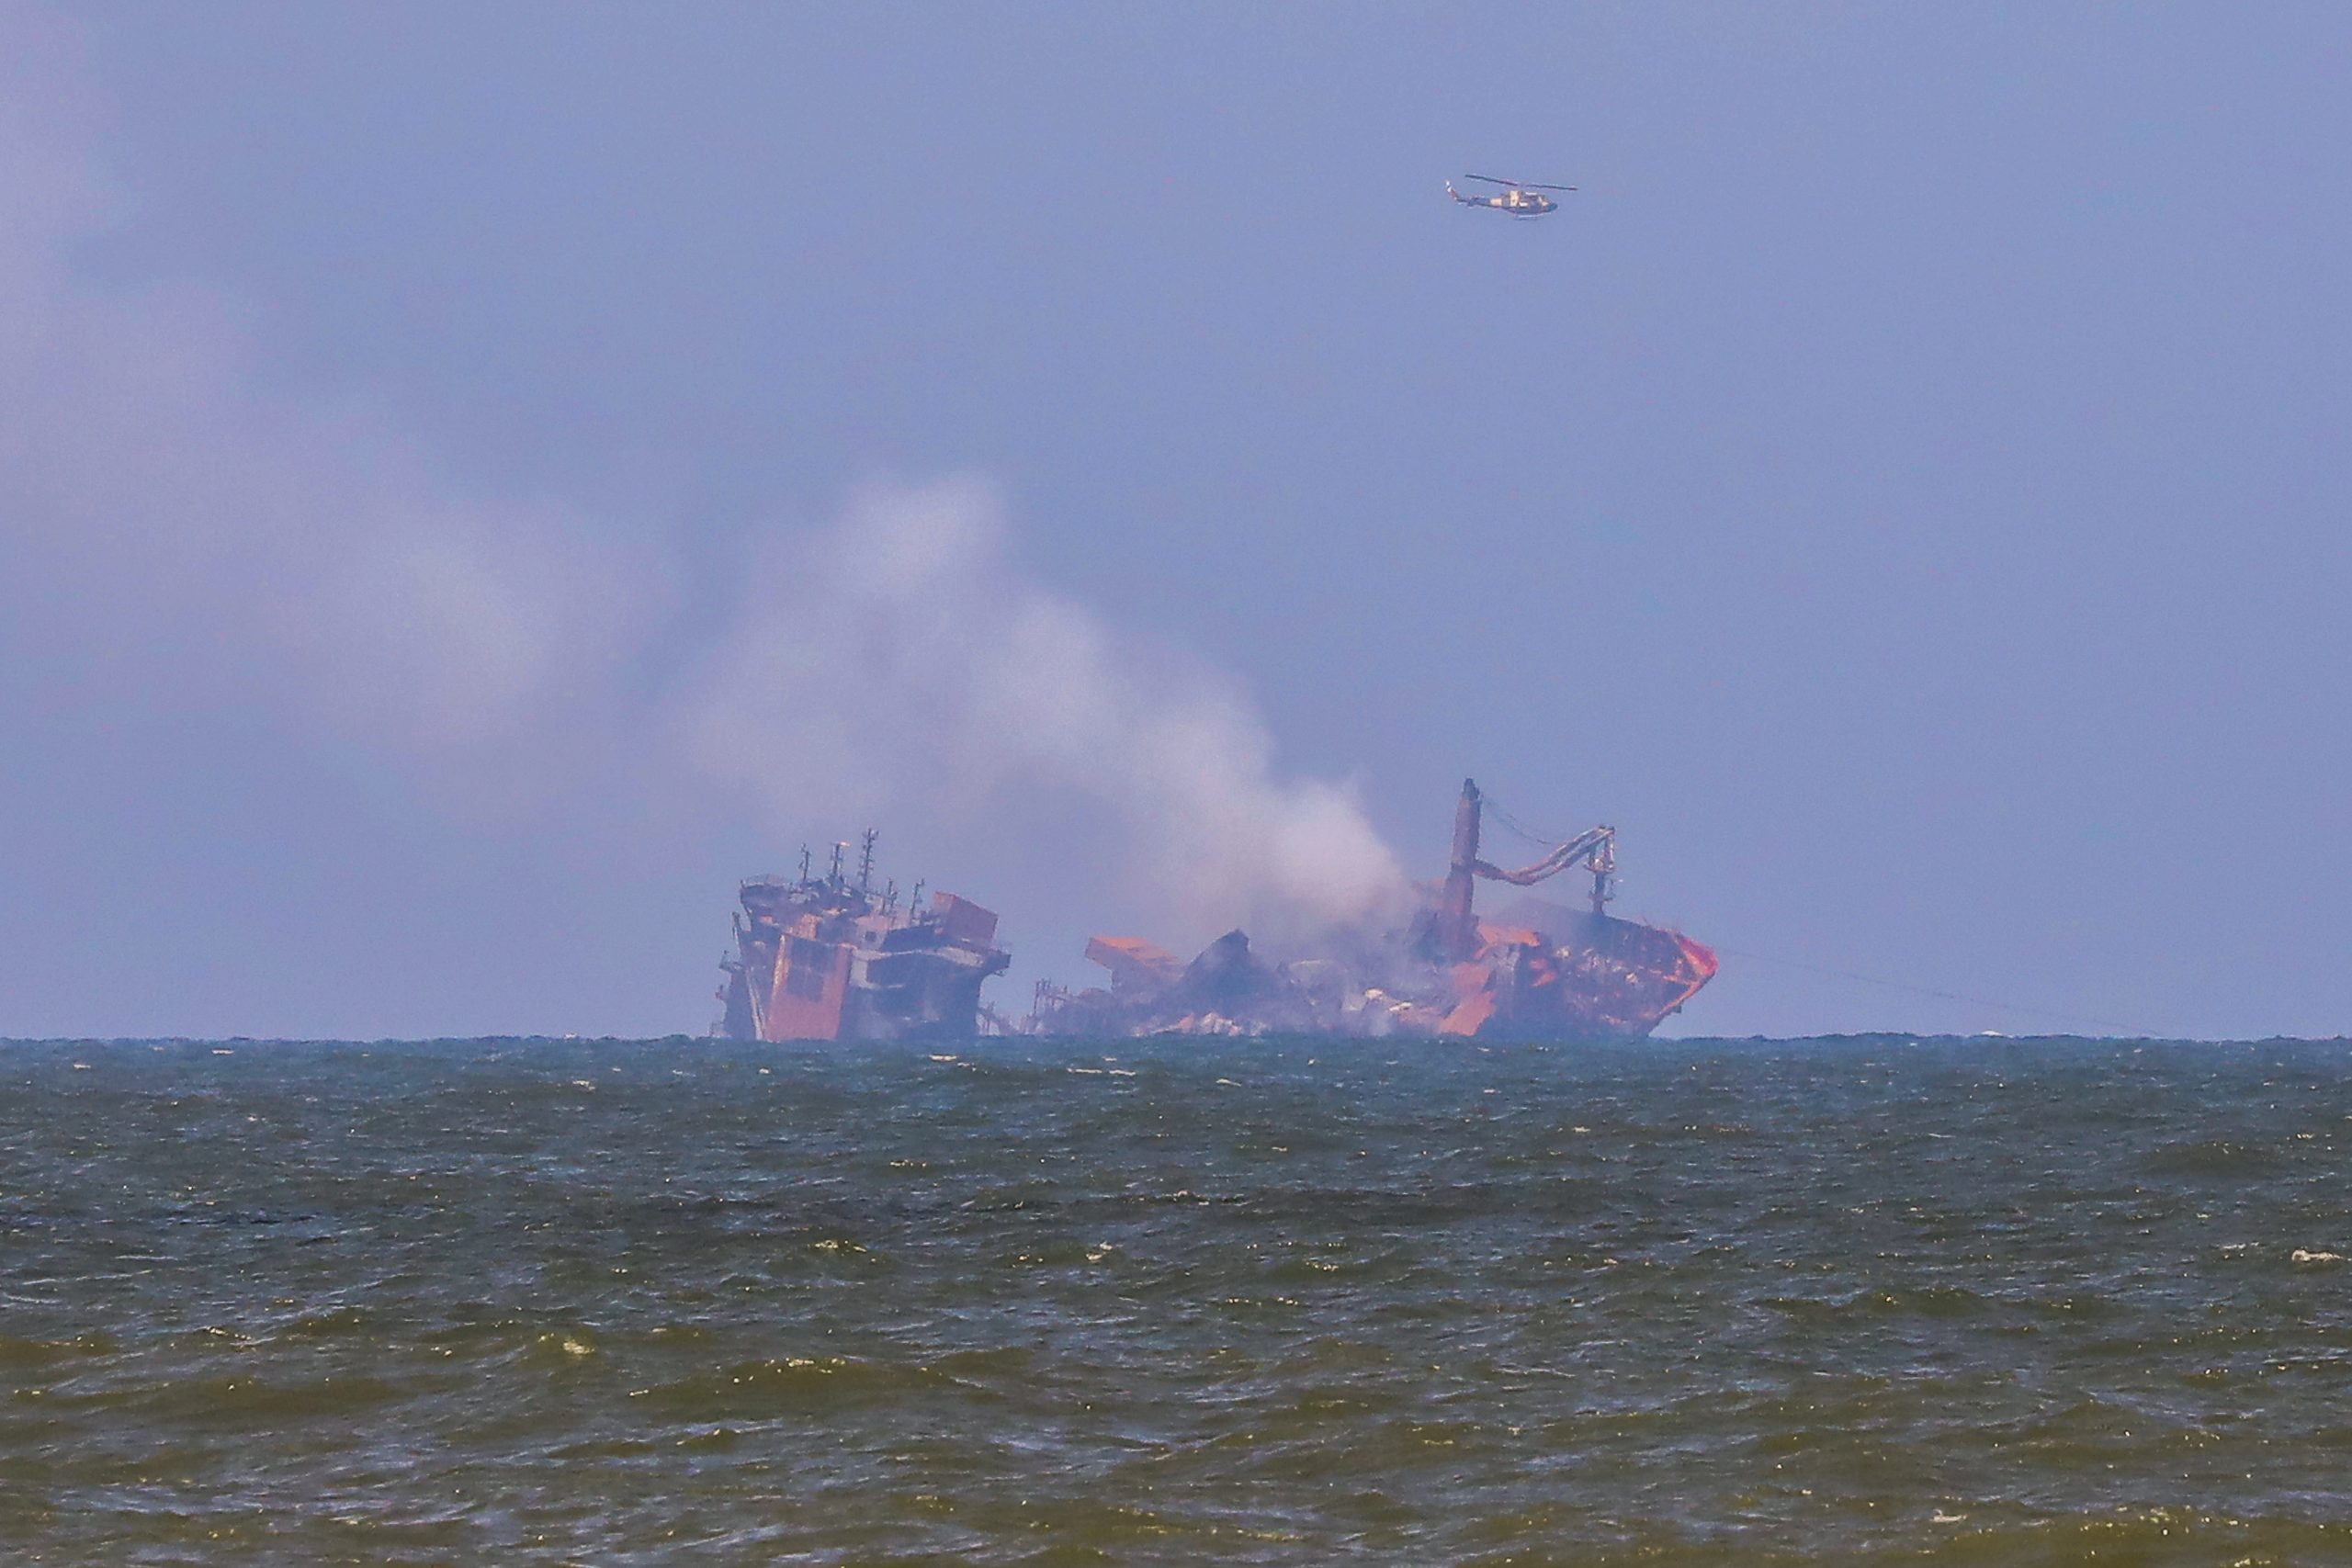 epa09242444 Smoke rises from the fire gutted and crippled container cargo vessel MV X-Press Pearl in Sri Lanka, 02 June 2021. The fire on the Singaporean flagged container cargo vessel MV X-Press Pearl, which had been burning for over 13 days, was doused and the salvage company began towing it towards deeper seas off the coast of Colombo on 02 June. However, latest reports by the Sri Lanka Navy stated that the towing operation had been halted as the stern of the ship was striking the seabed. They also reported that so far no oil spills have been observed. A huge amount of plastic granules and debris has already washed ashore on beaches from Colombo to Negombo and authorities now fear another wave of massive pollution should the 278 tonnes of bunker oil and 50 tonnes of gas in the Singapore-registered ship's fuel tanks leak into the Indian Ocean.  EPA/CHAMILA KARUNARATHNE